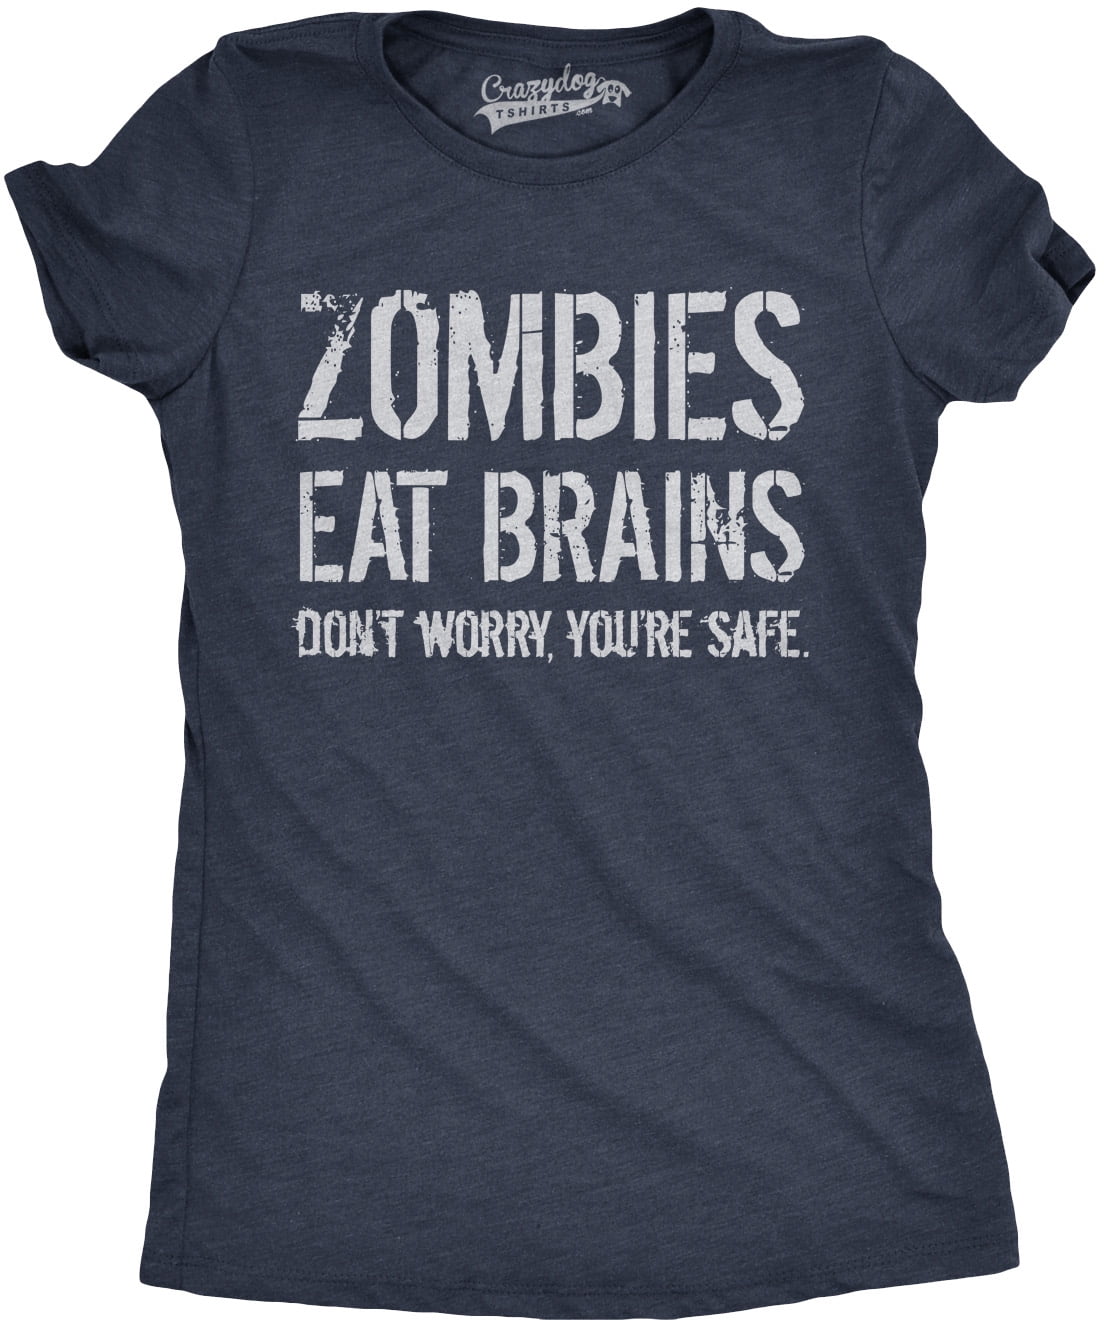 Eat brain. The Zombies ate your Brains. Safe funny. Zombie eating own Brain.